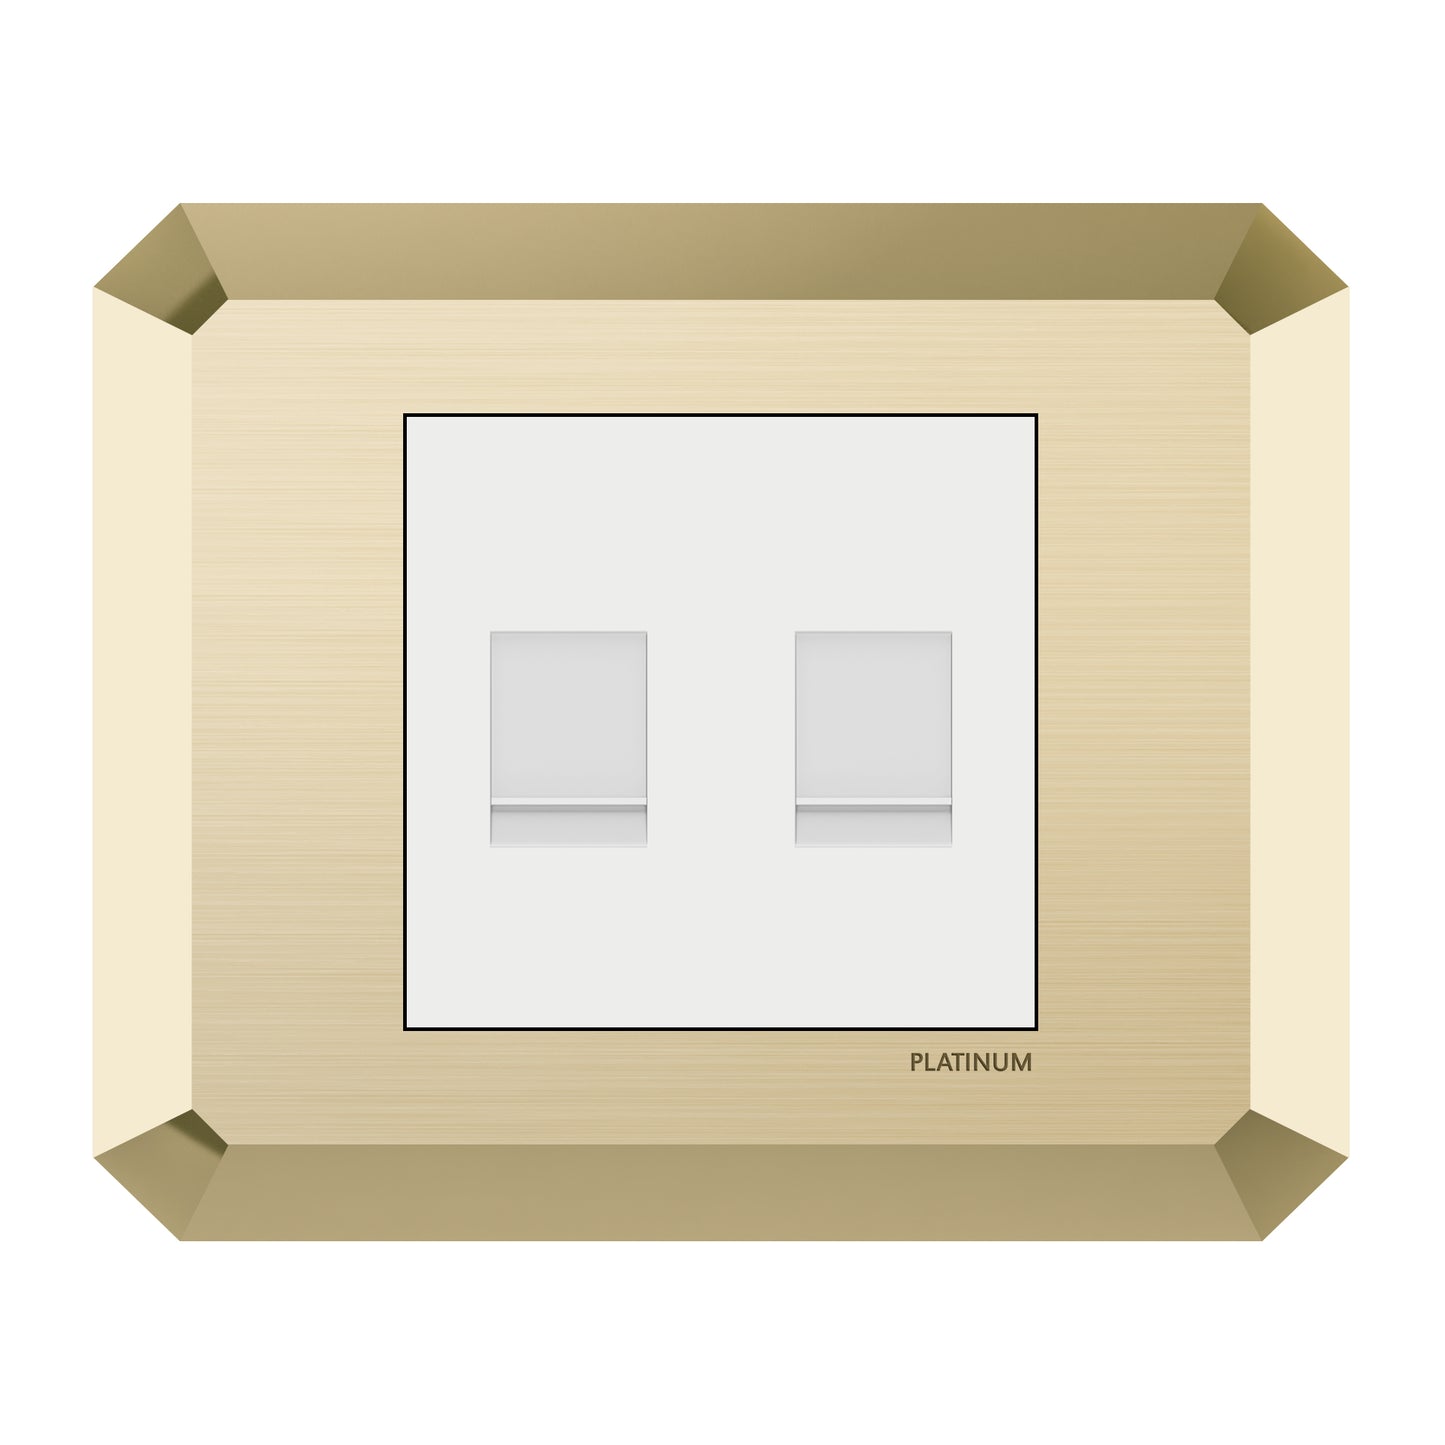 Double Tel Socket Cat3 with Plate (Platinum Electrical Wiring Devices)